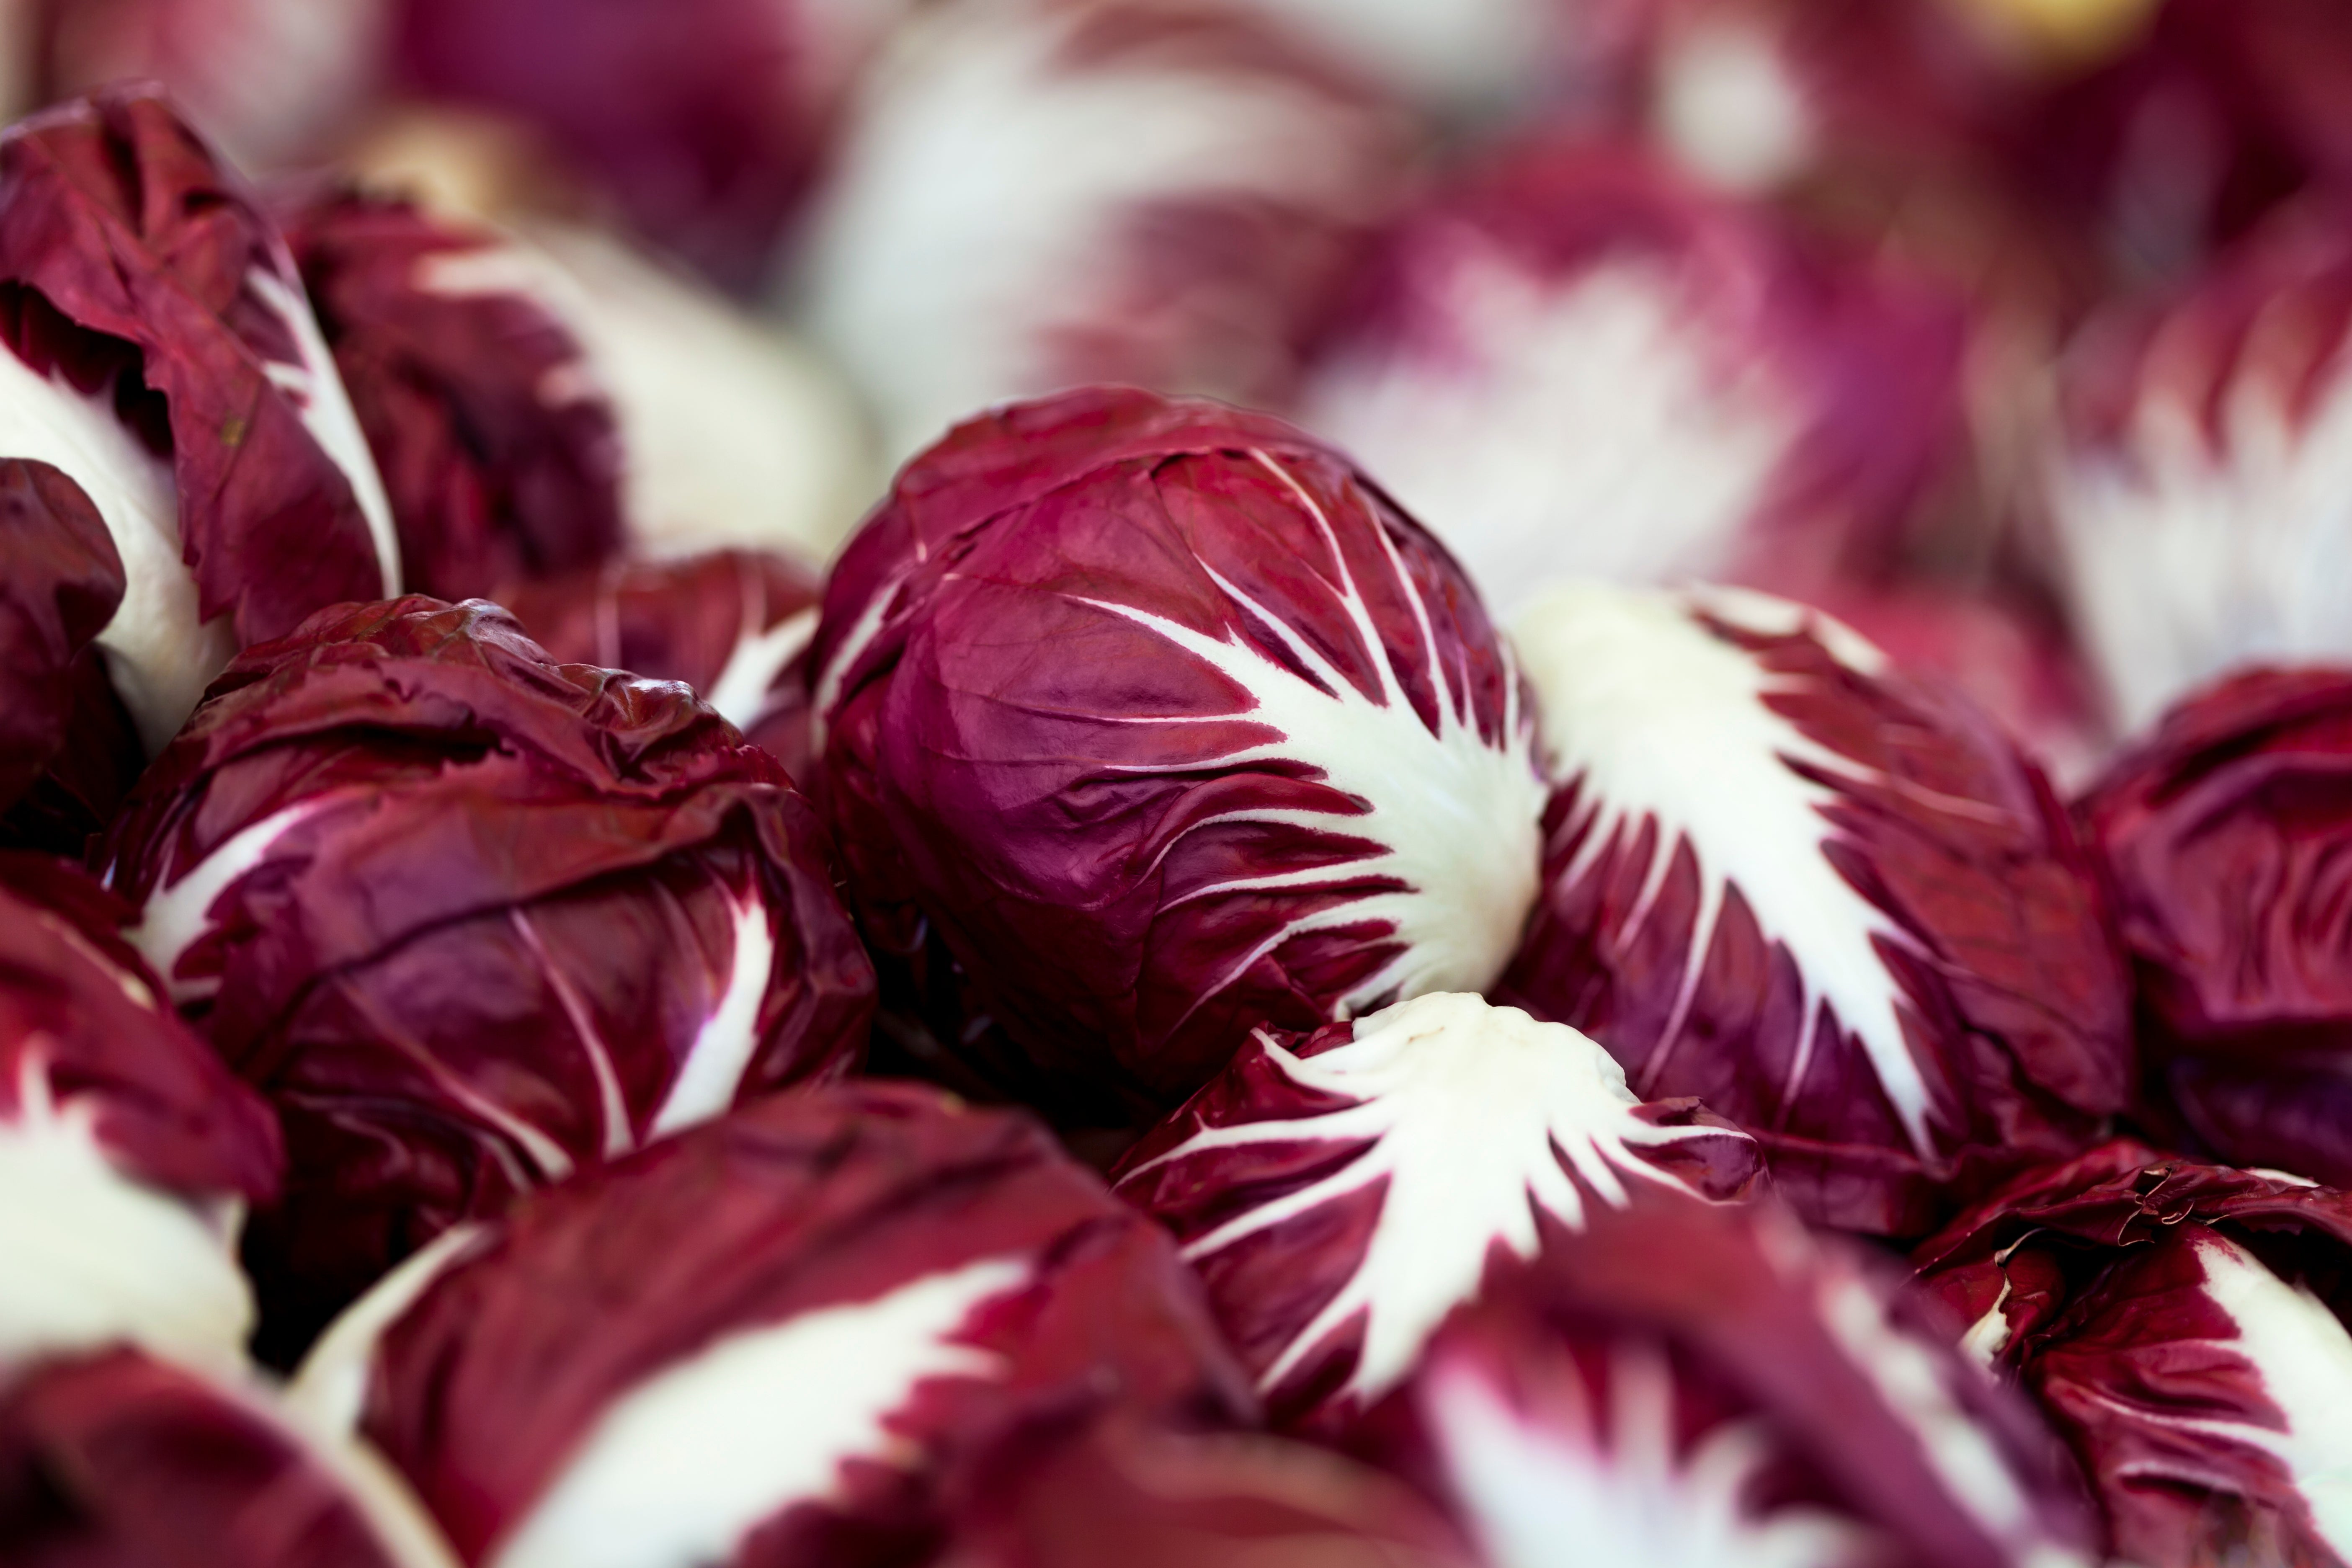 Chicories are known for a bitterness that can range from mild to assertive